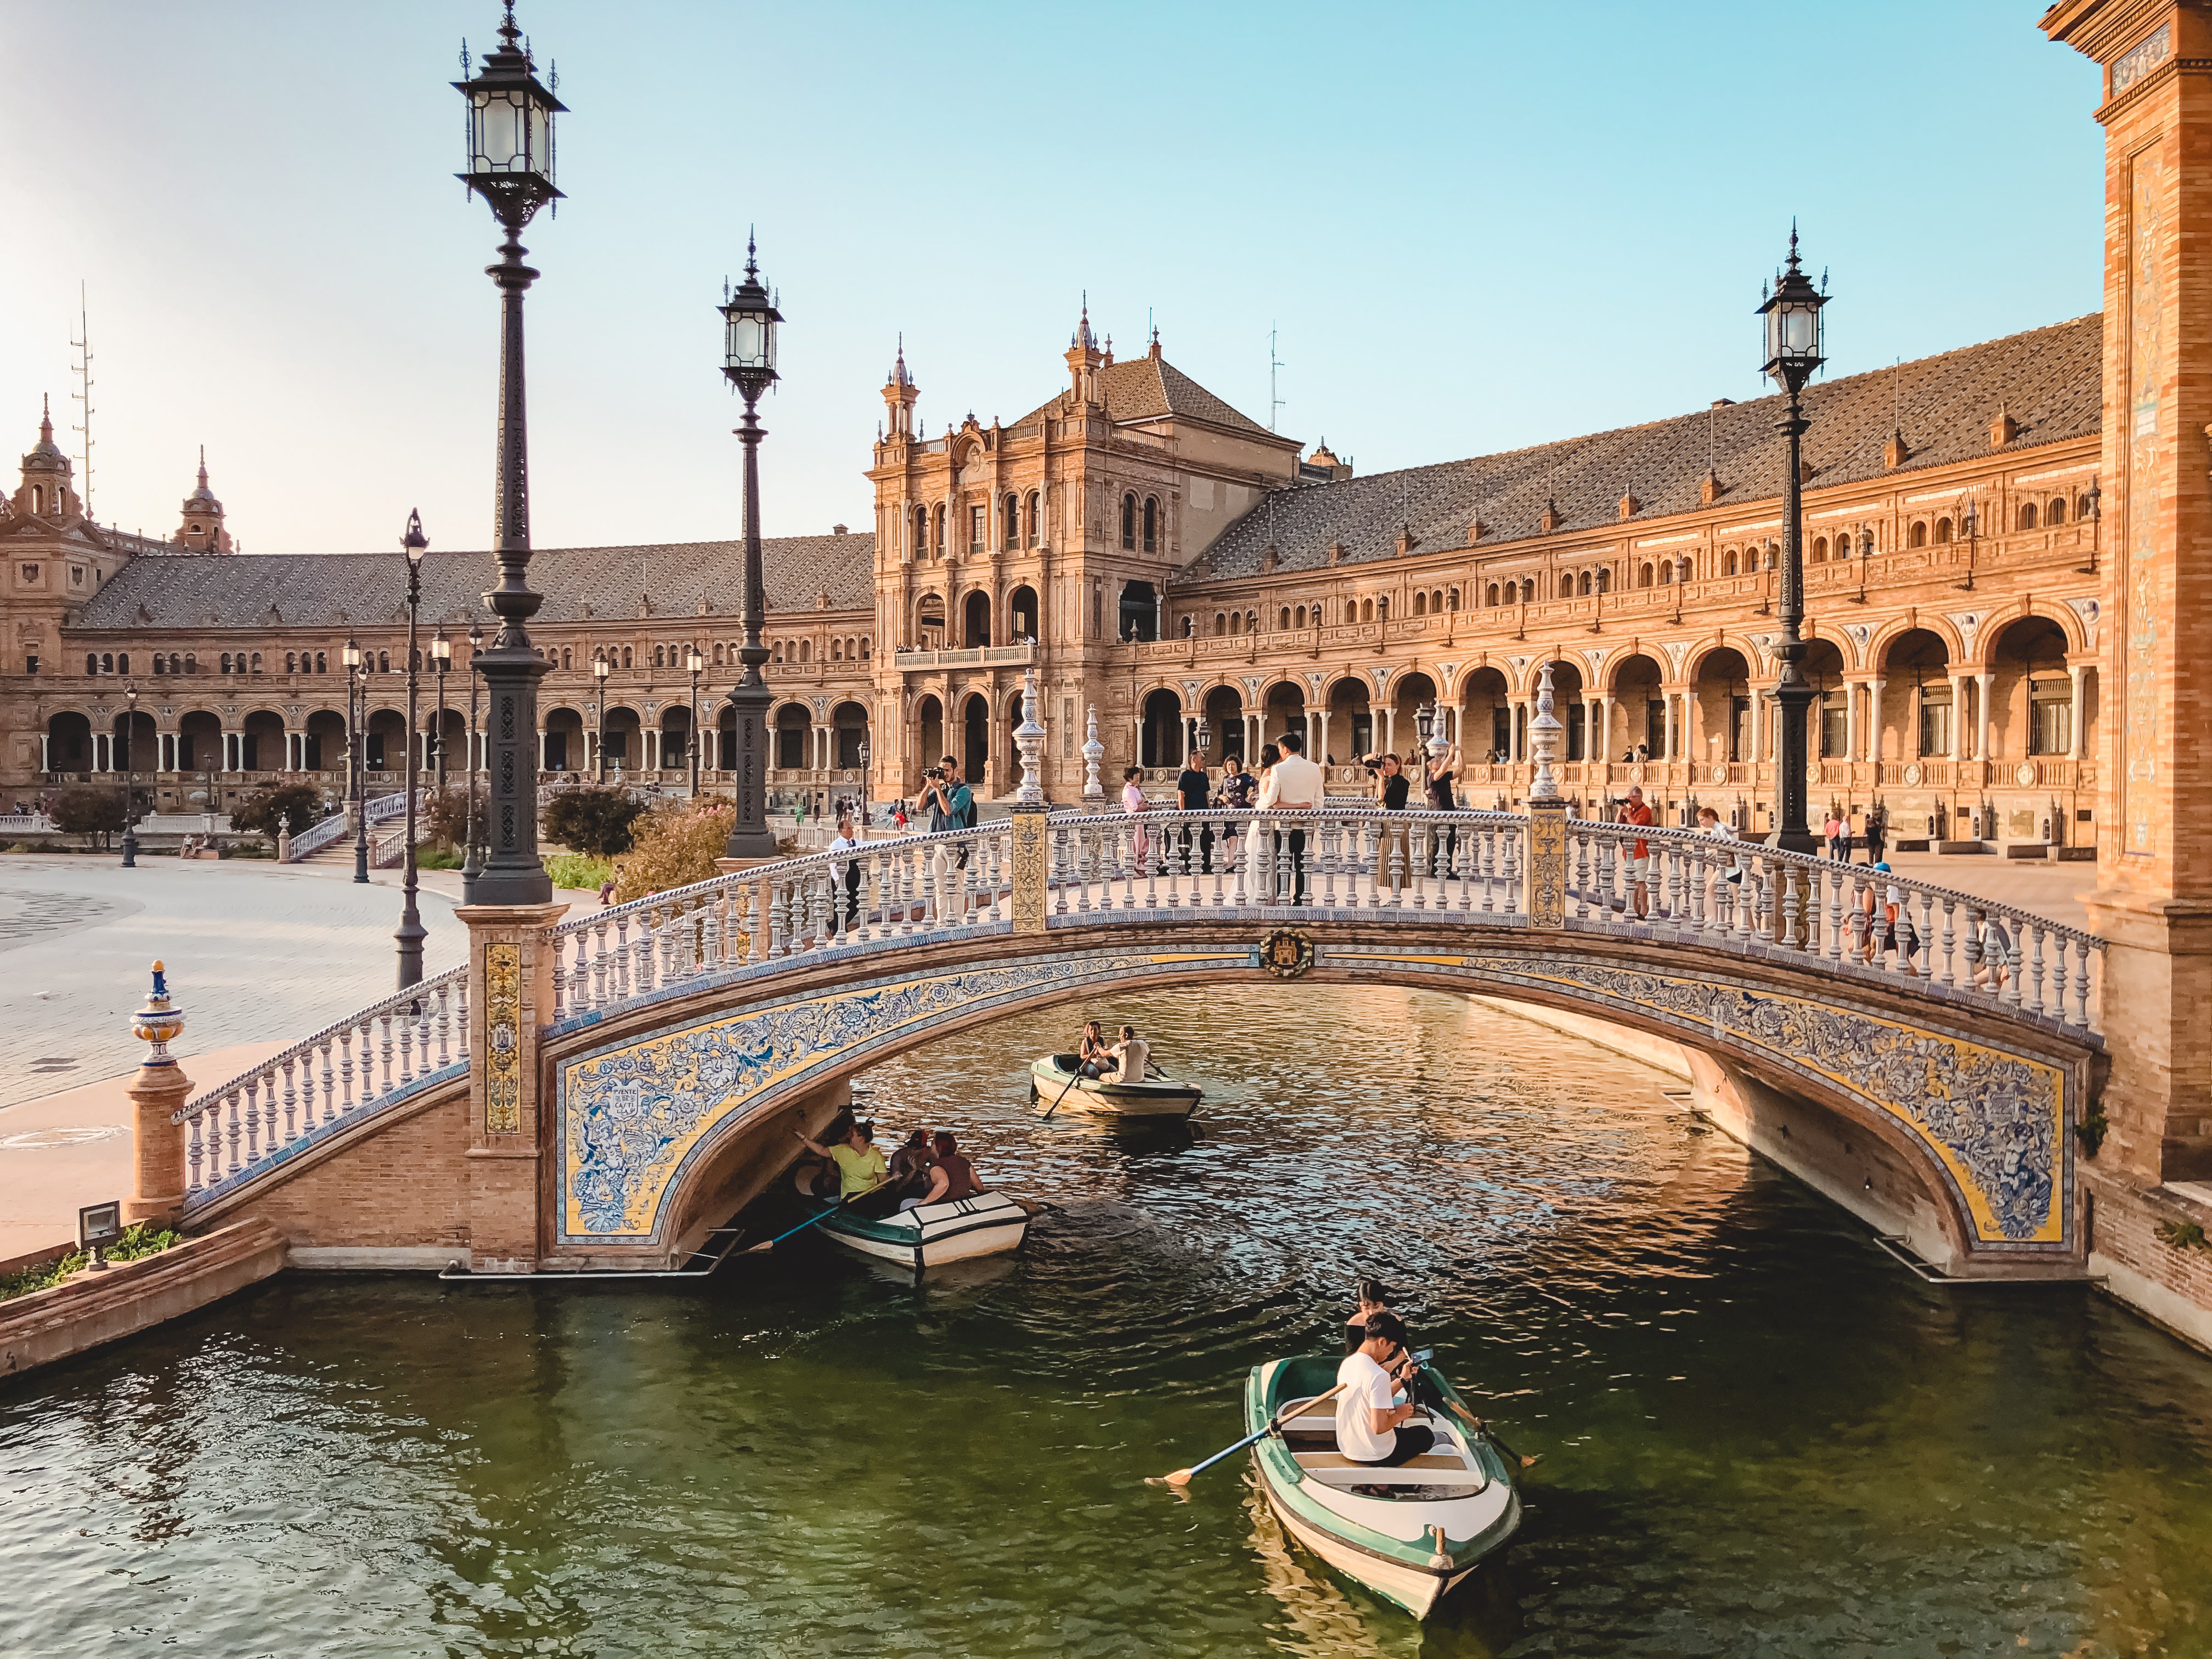 Rowboats in canal with bridge at Plaza de Espana Seville